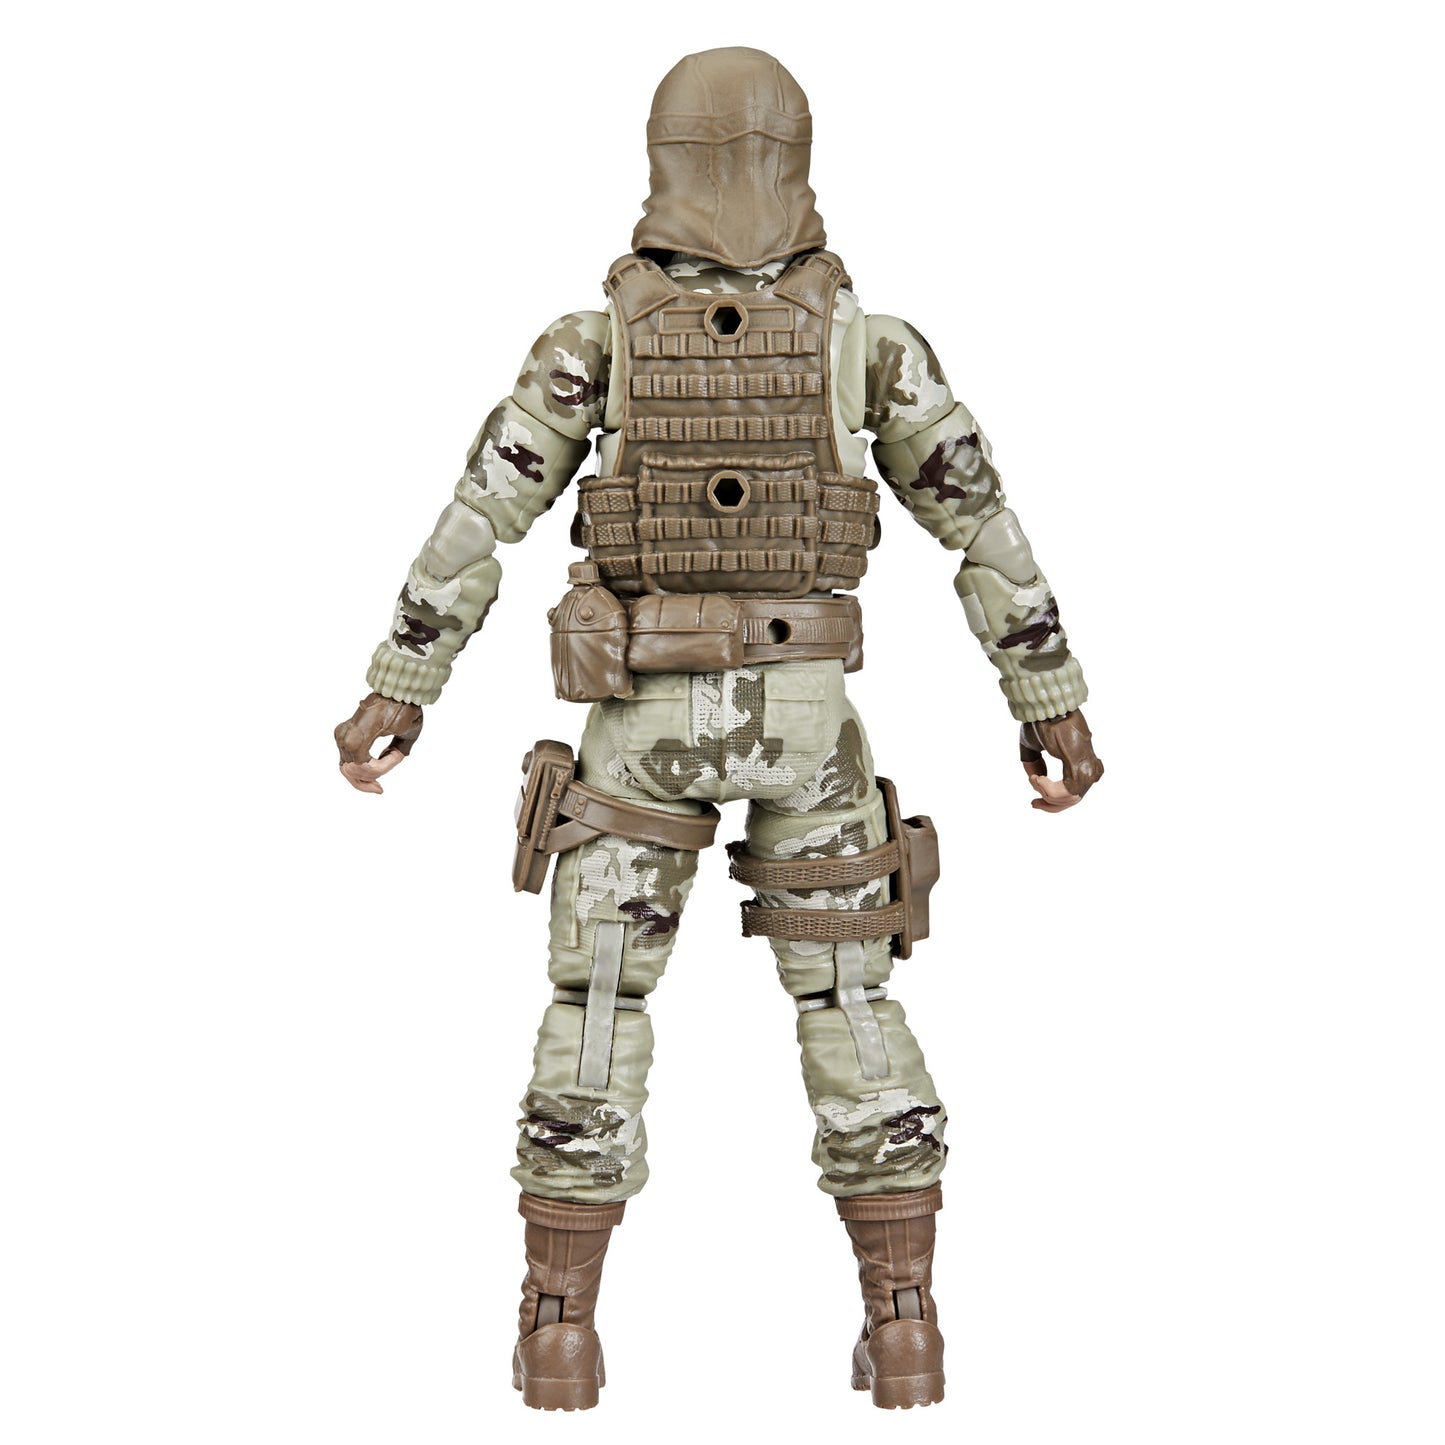 (PRE-ORDER) GI Joe Classified Series - 60th Anniversary Infantry Soldier - 6 inch Action Figure